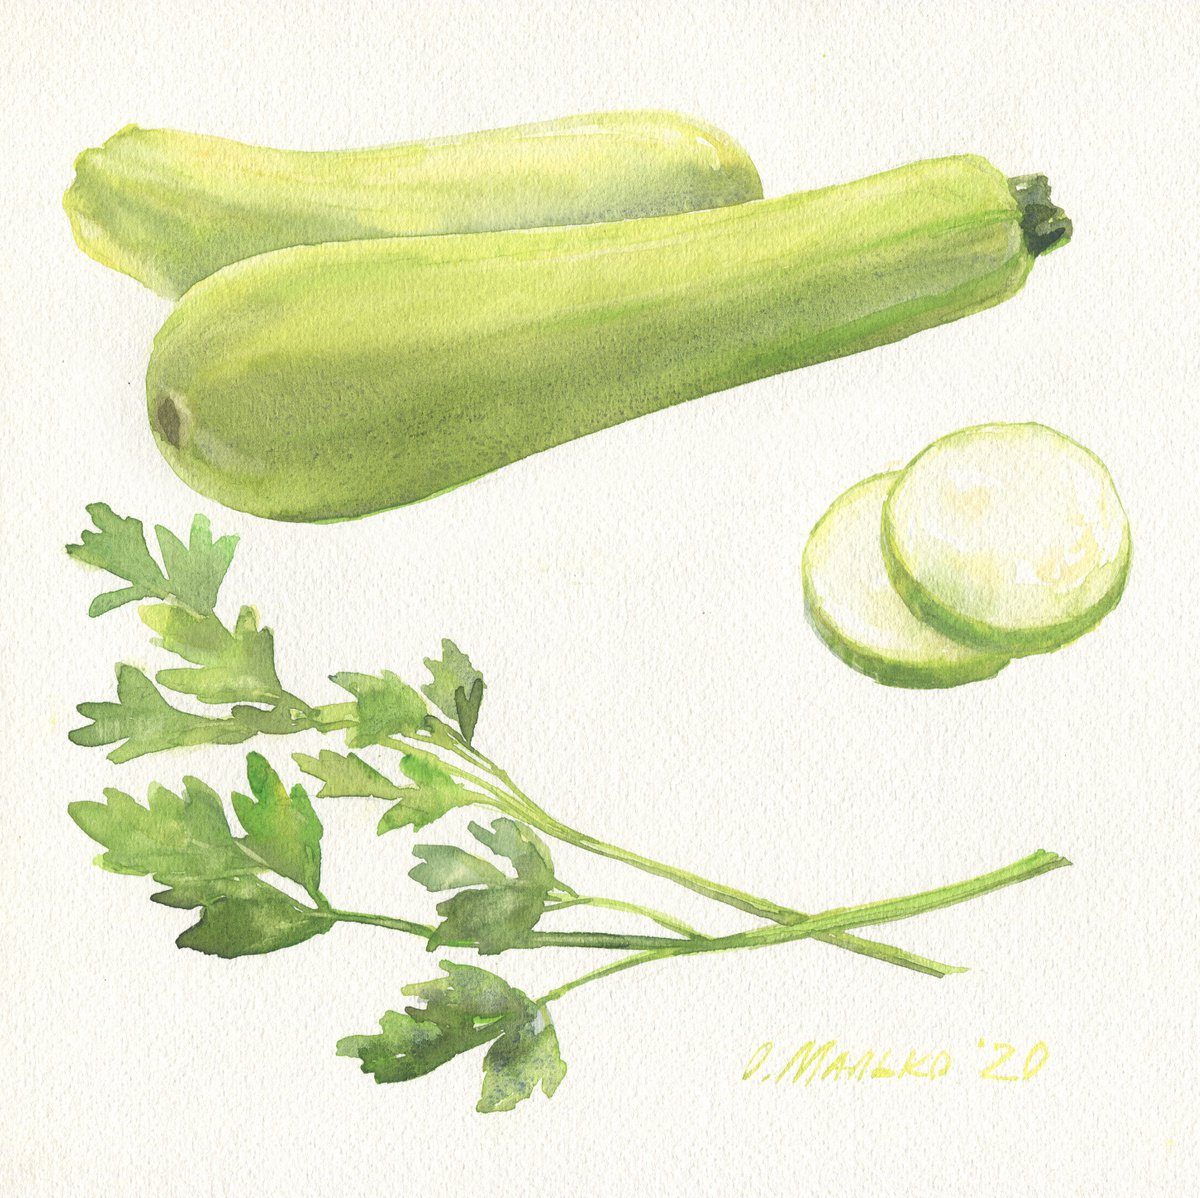 Veggies 2. Zucchini and greens / Original vegetables watercolor. Modern picture for kitche... by Olha Malko